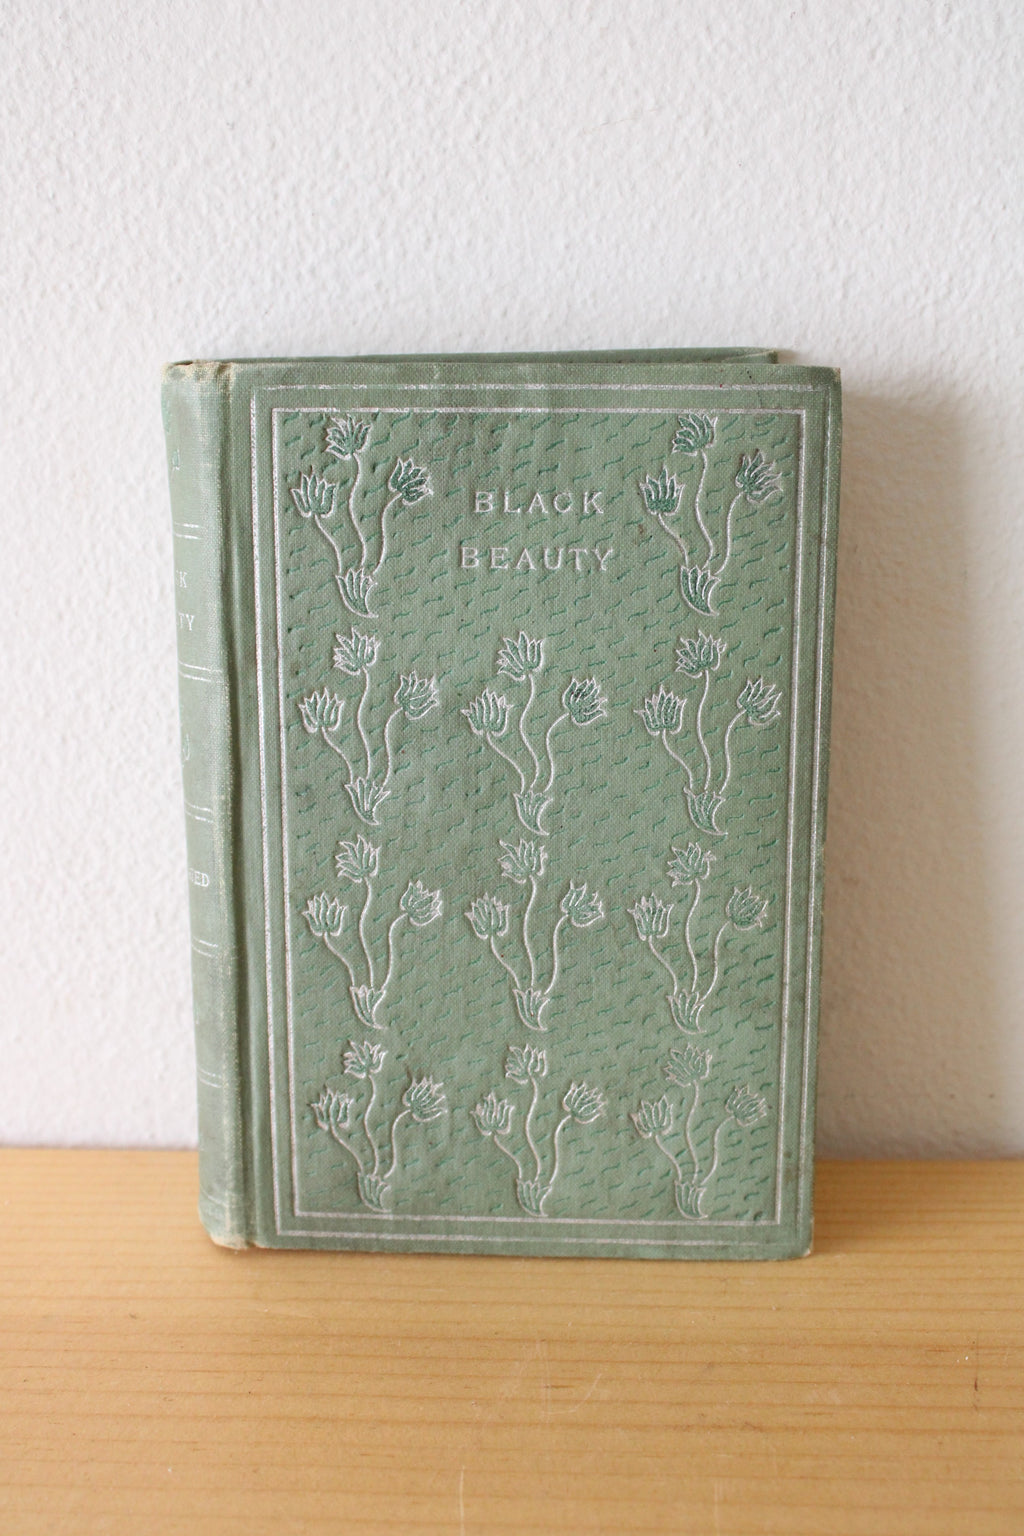 Black Beauty By Anna Sewell 1895 Edition